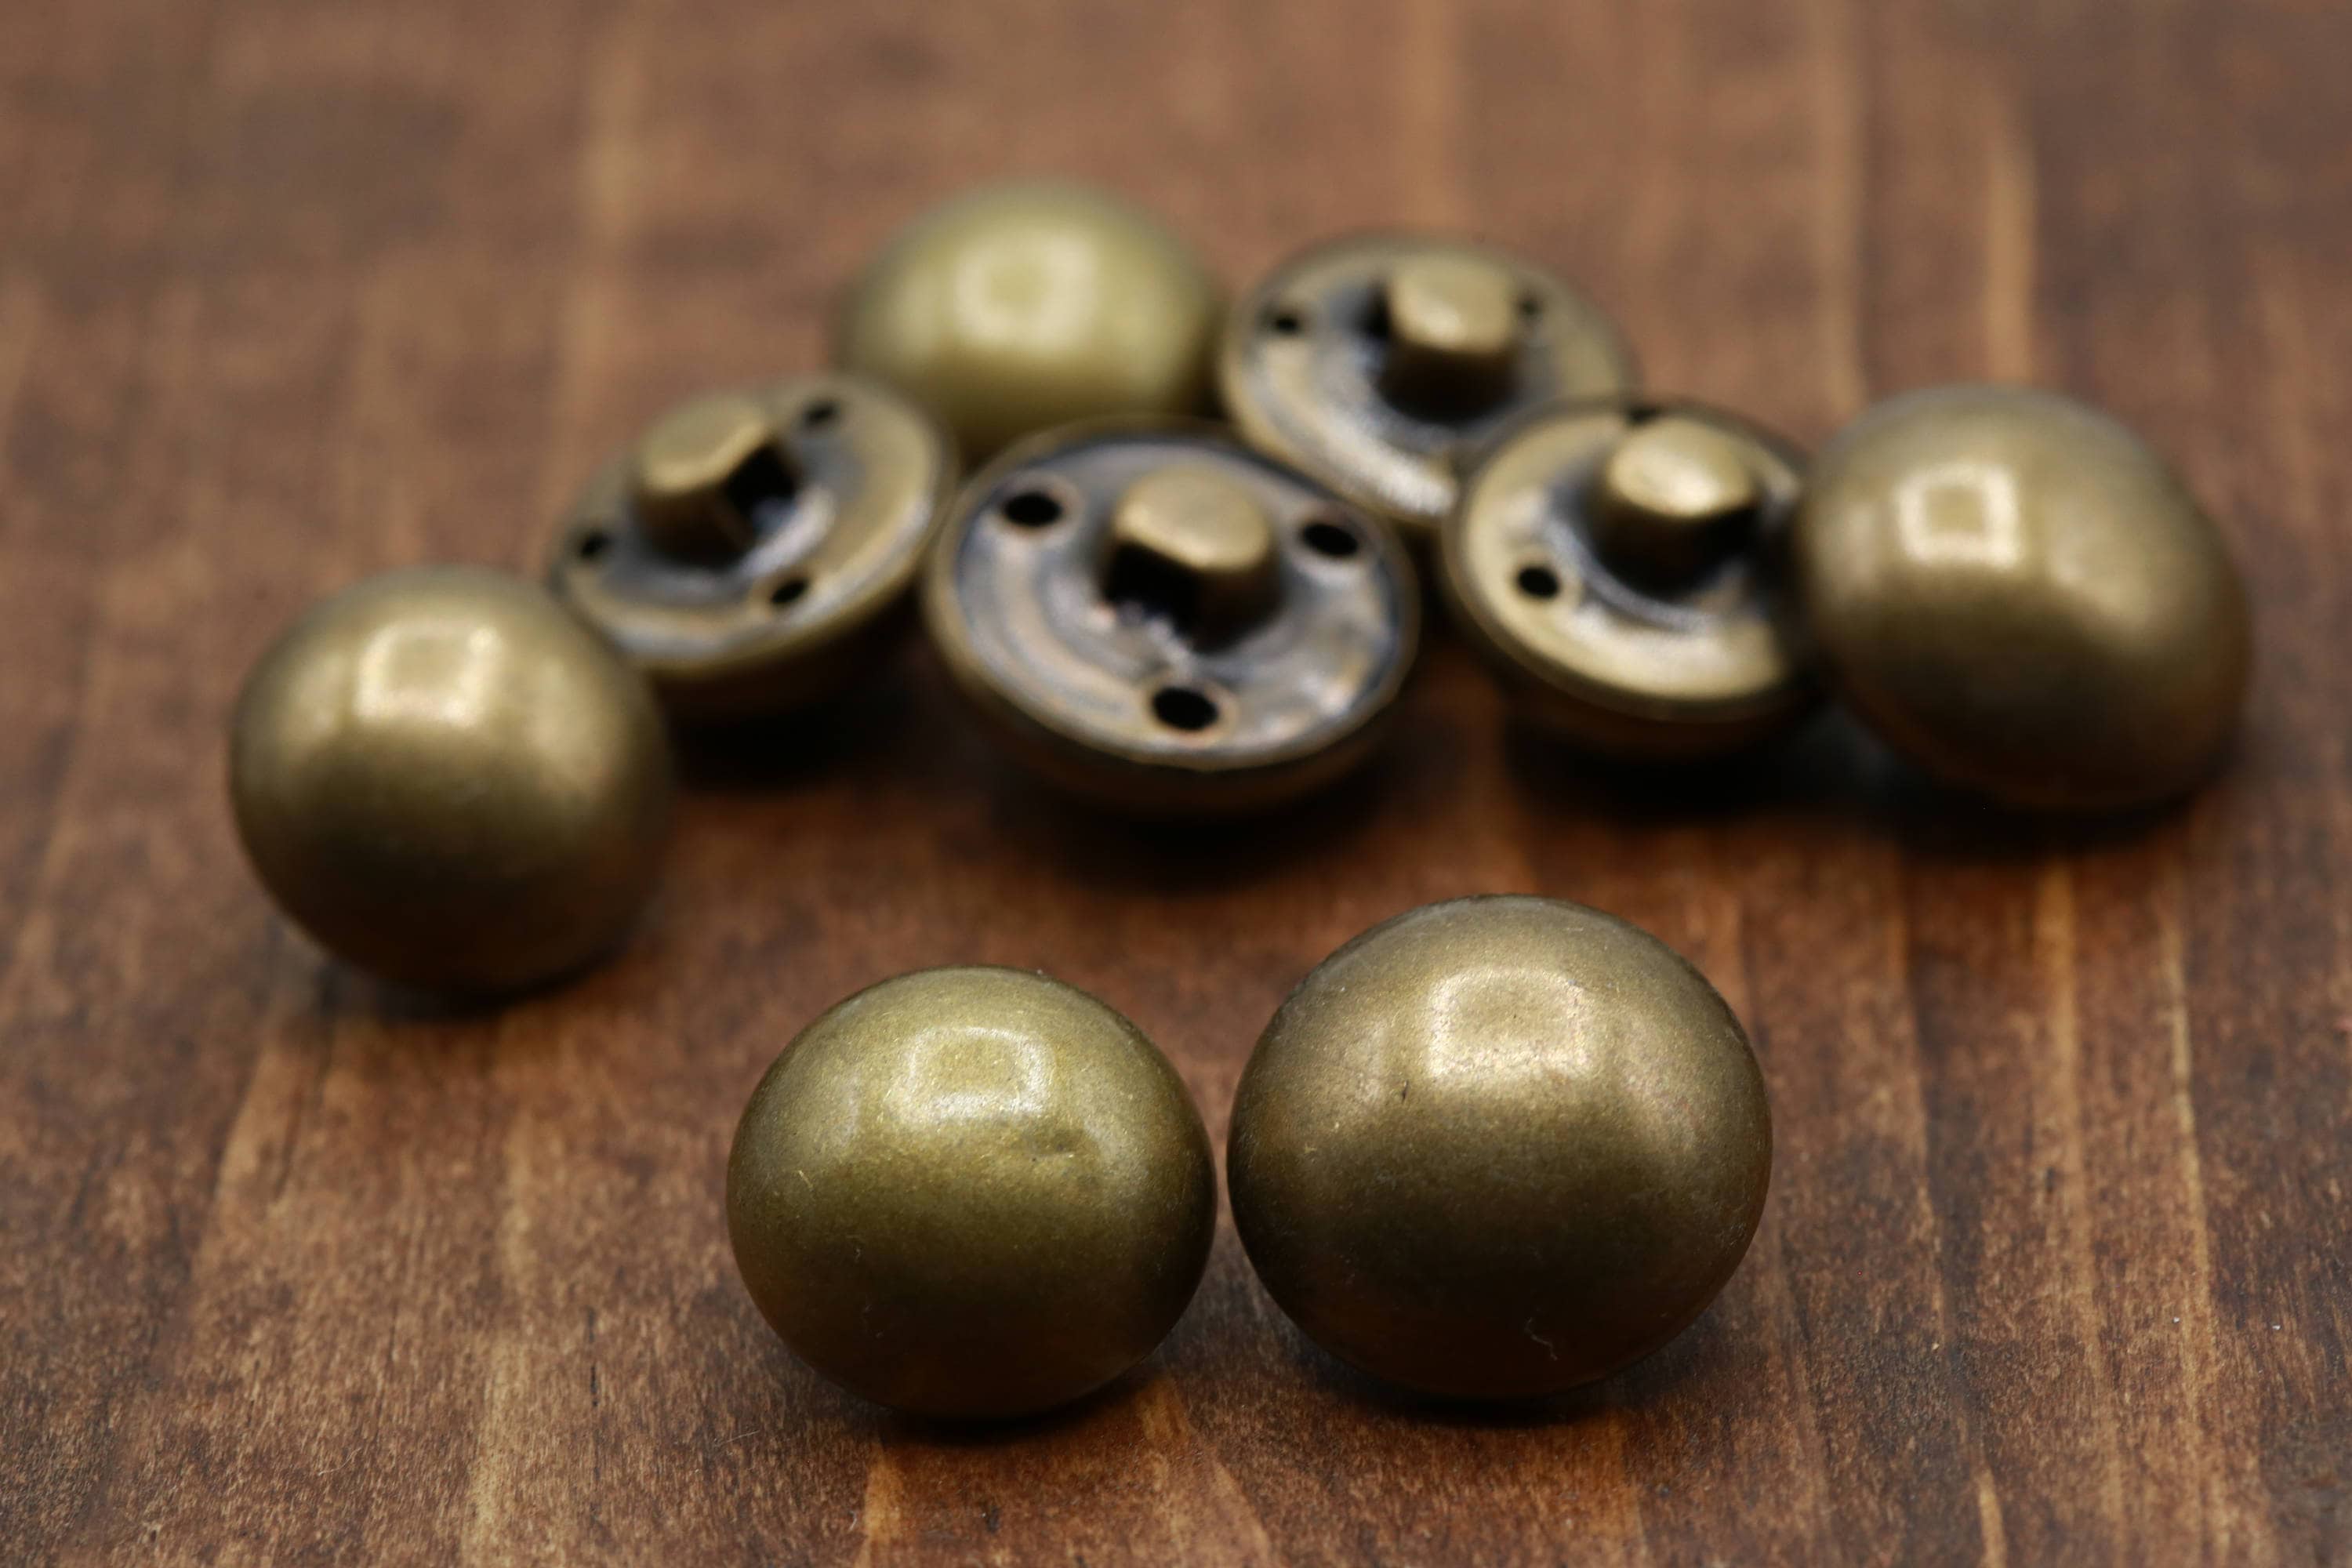 ANTIQUE BRASS DOMED BUTTONS - Nasias Buttons